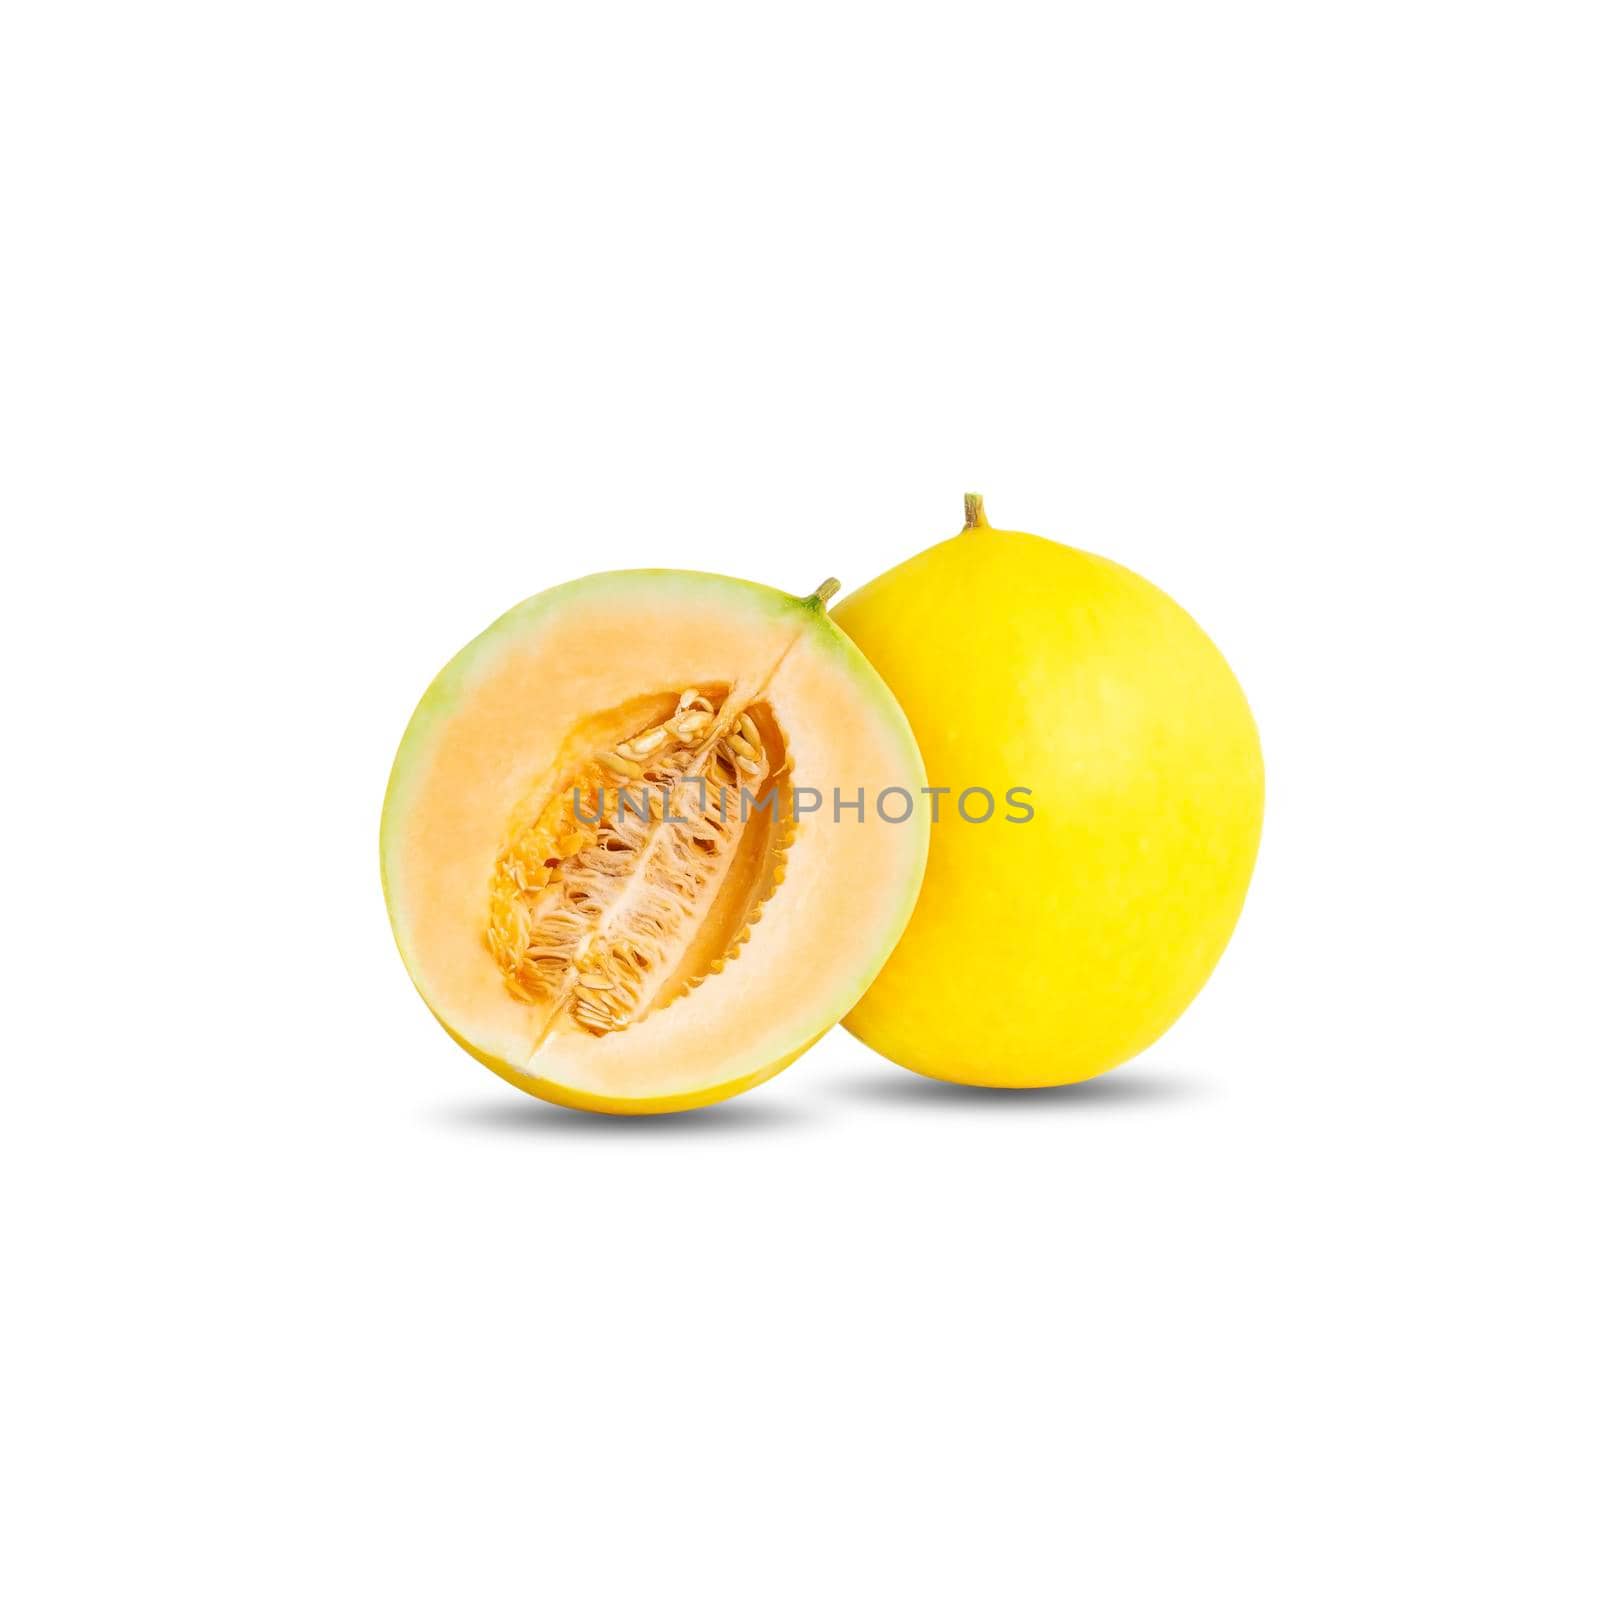 One cantaloupe or melon yellow color and a half piece isolated on white background by wattanaphob